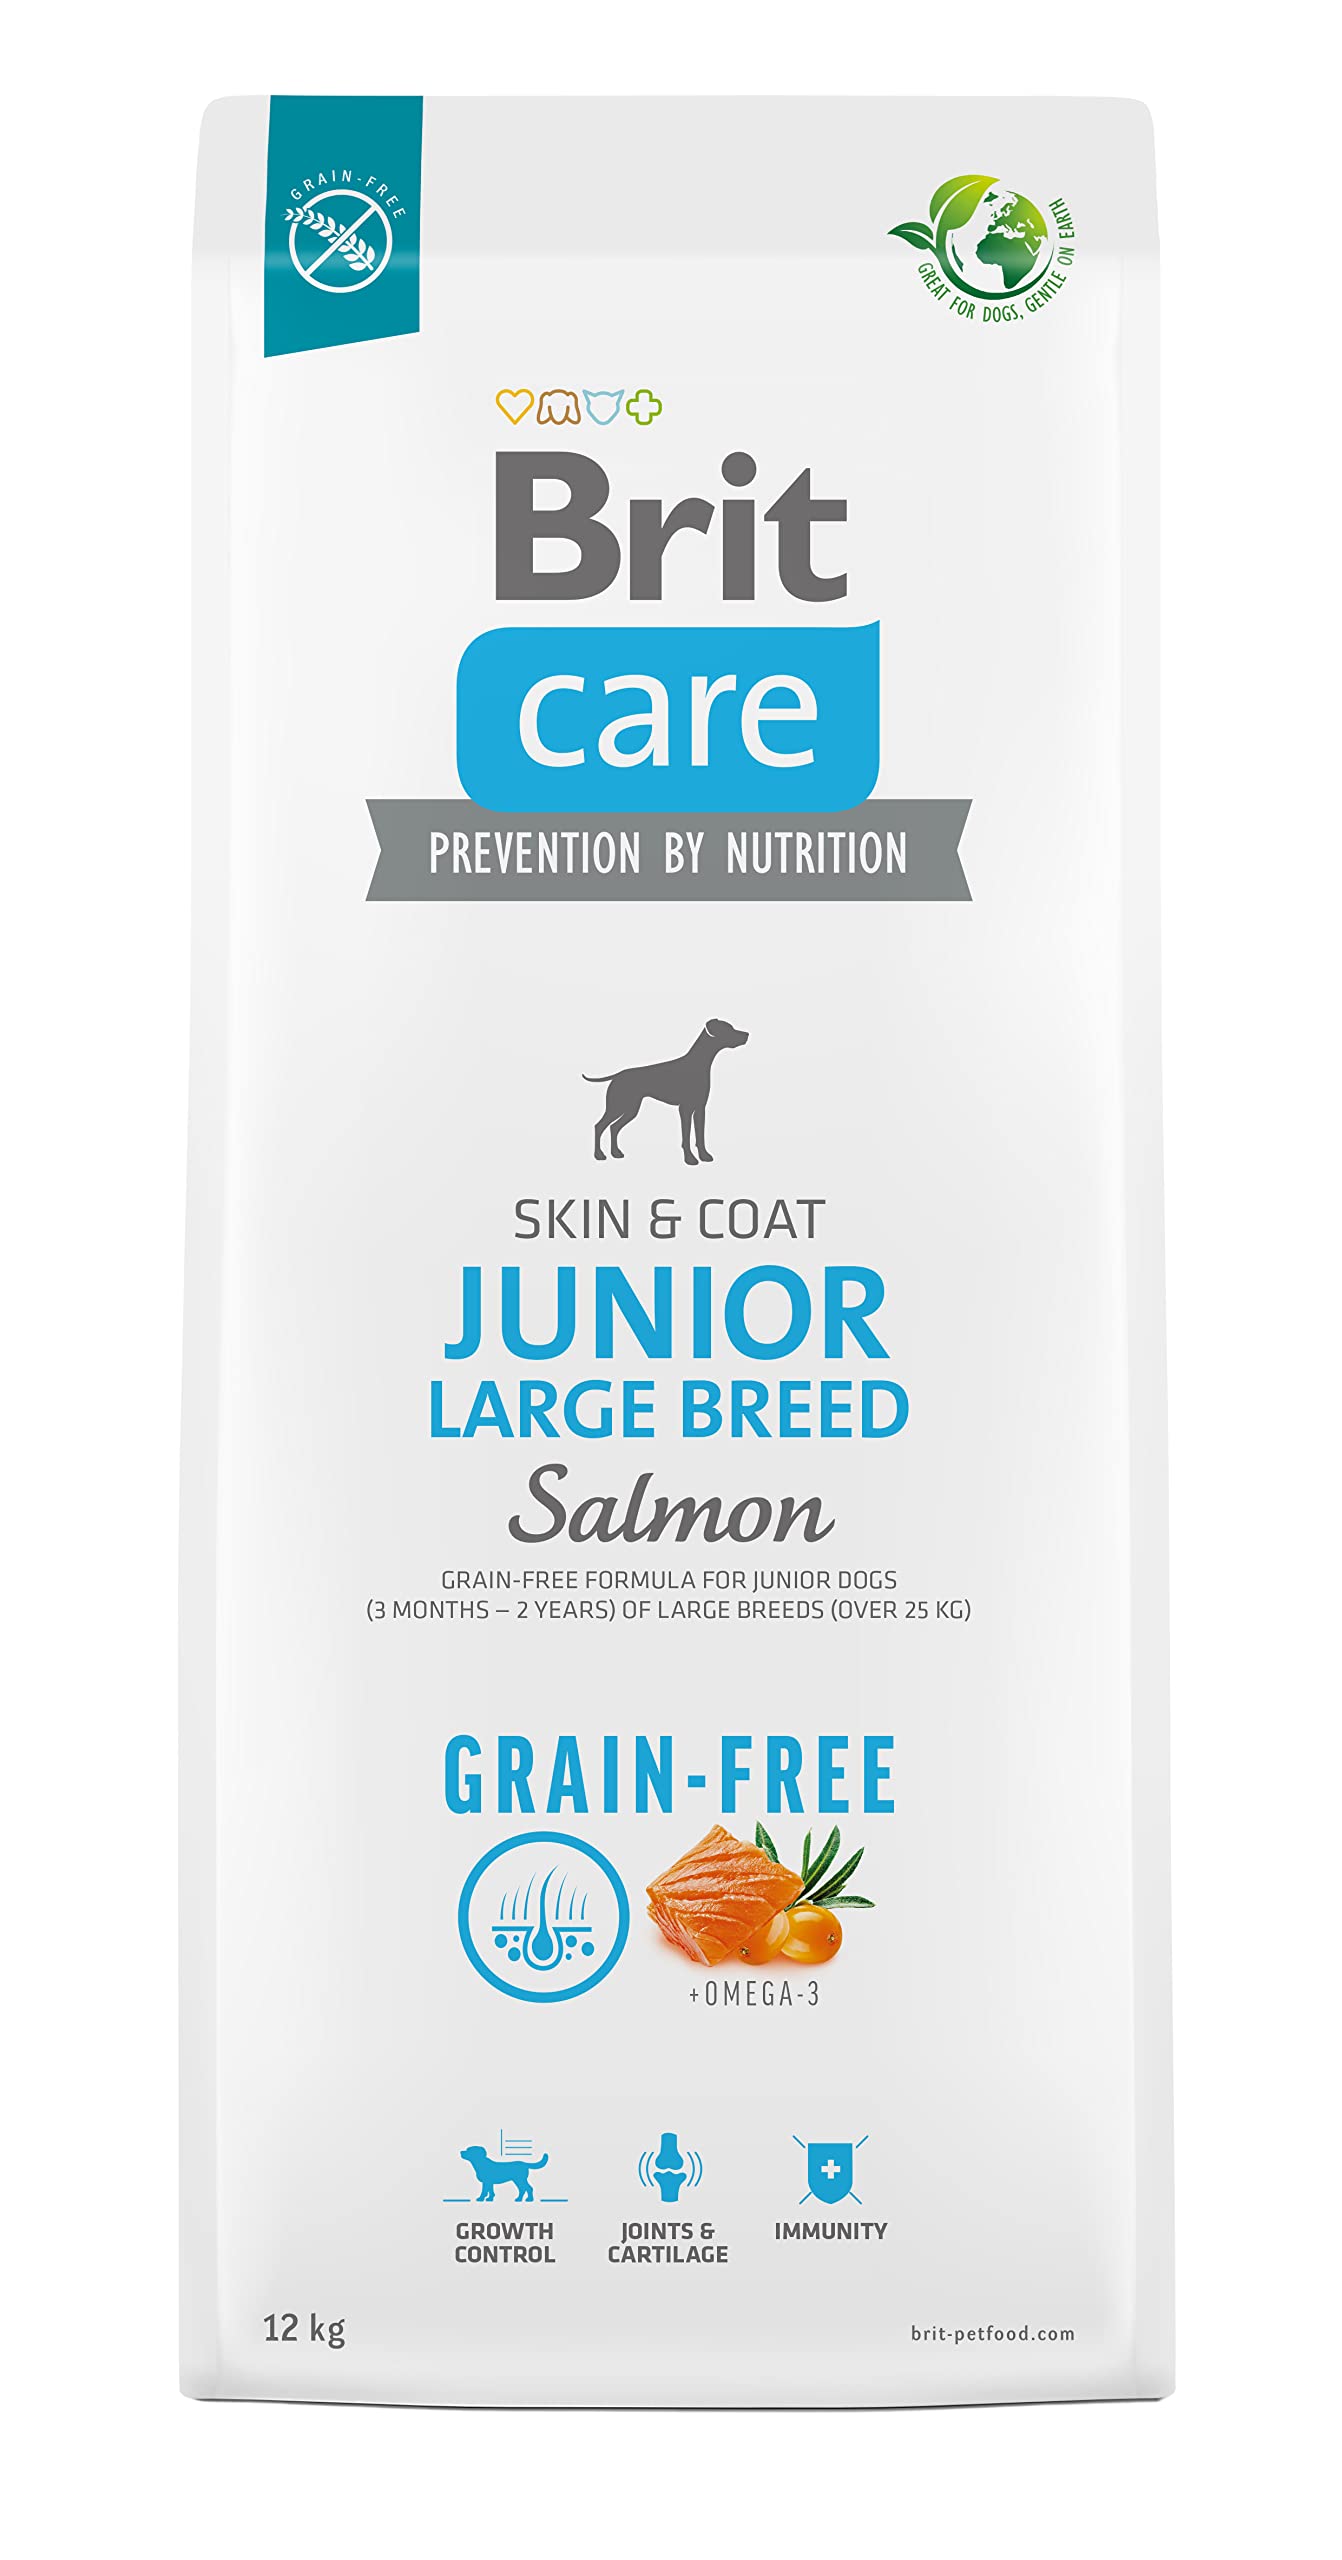 Brit Dry food for young dog (3 months - 2 years) large breeds over 25 kg Care Dog Grain-Free Junior Large salmon 12kg